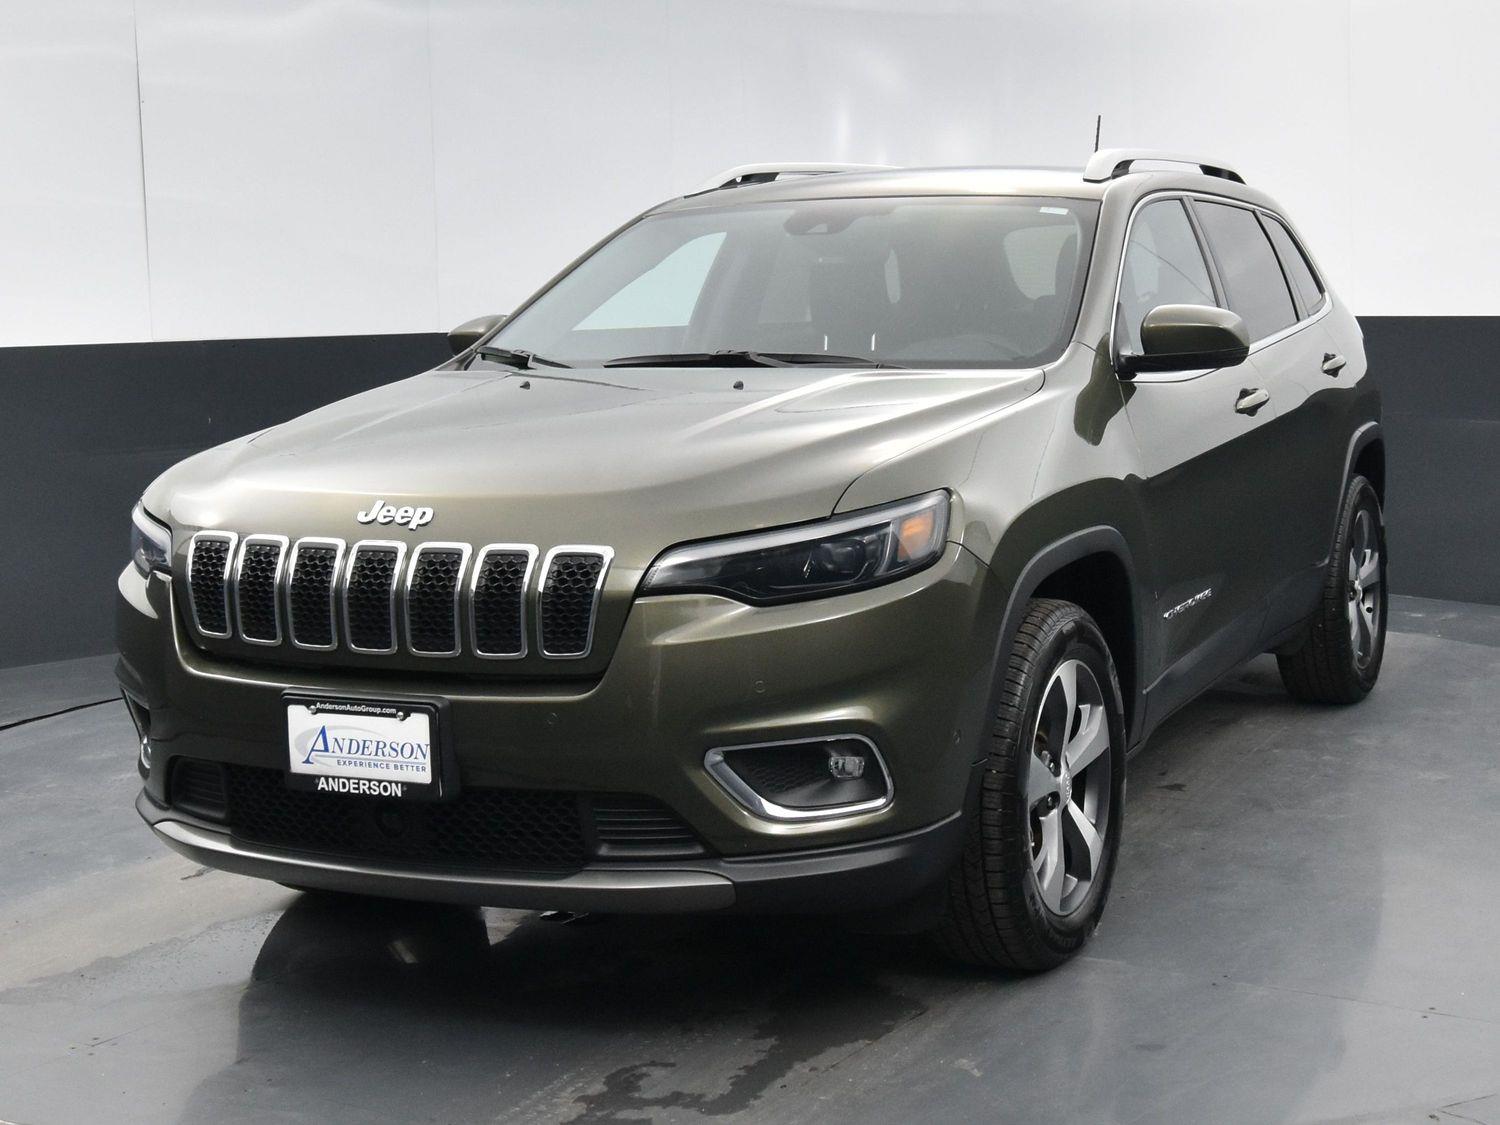 Used 2021 Jeep Cherokee Limited Sport Utility for sale in Grand Island NE